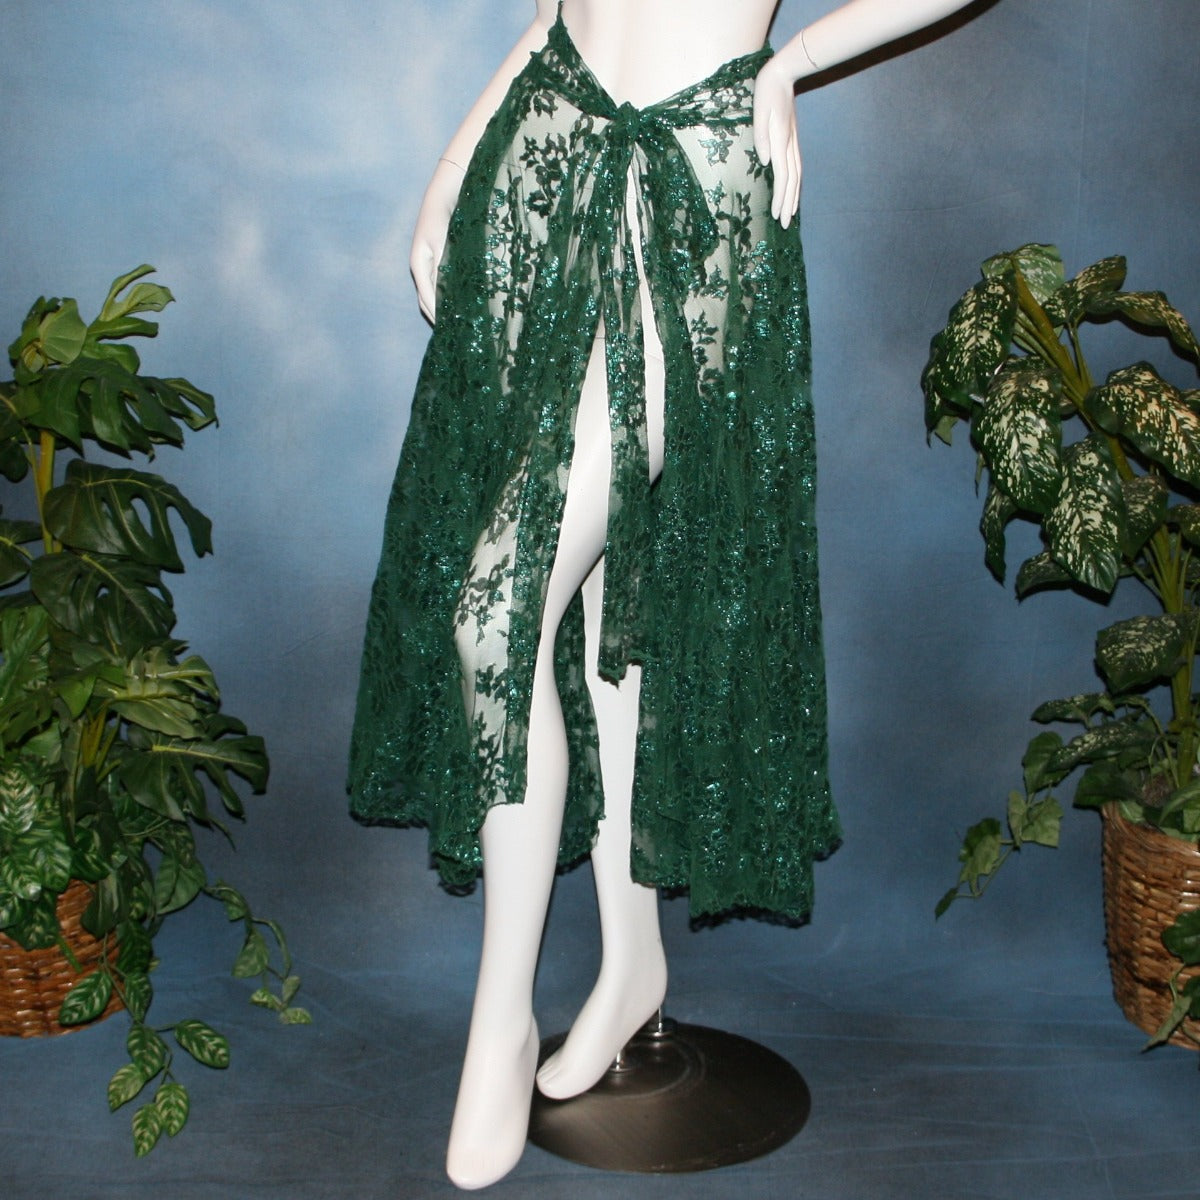 Very full emerald green lace ballroom skirt, wrap style, was created with yards of deep emerald green metallic lace.